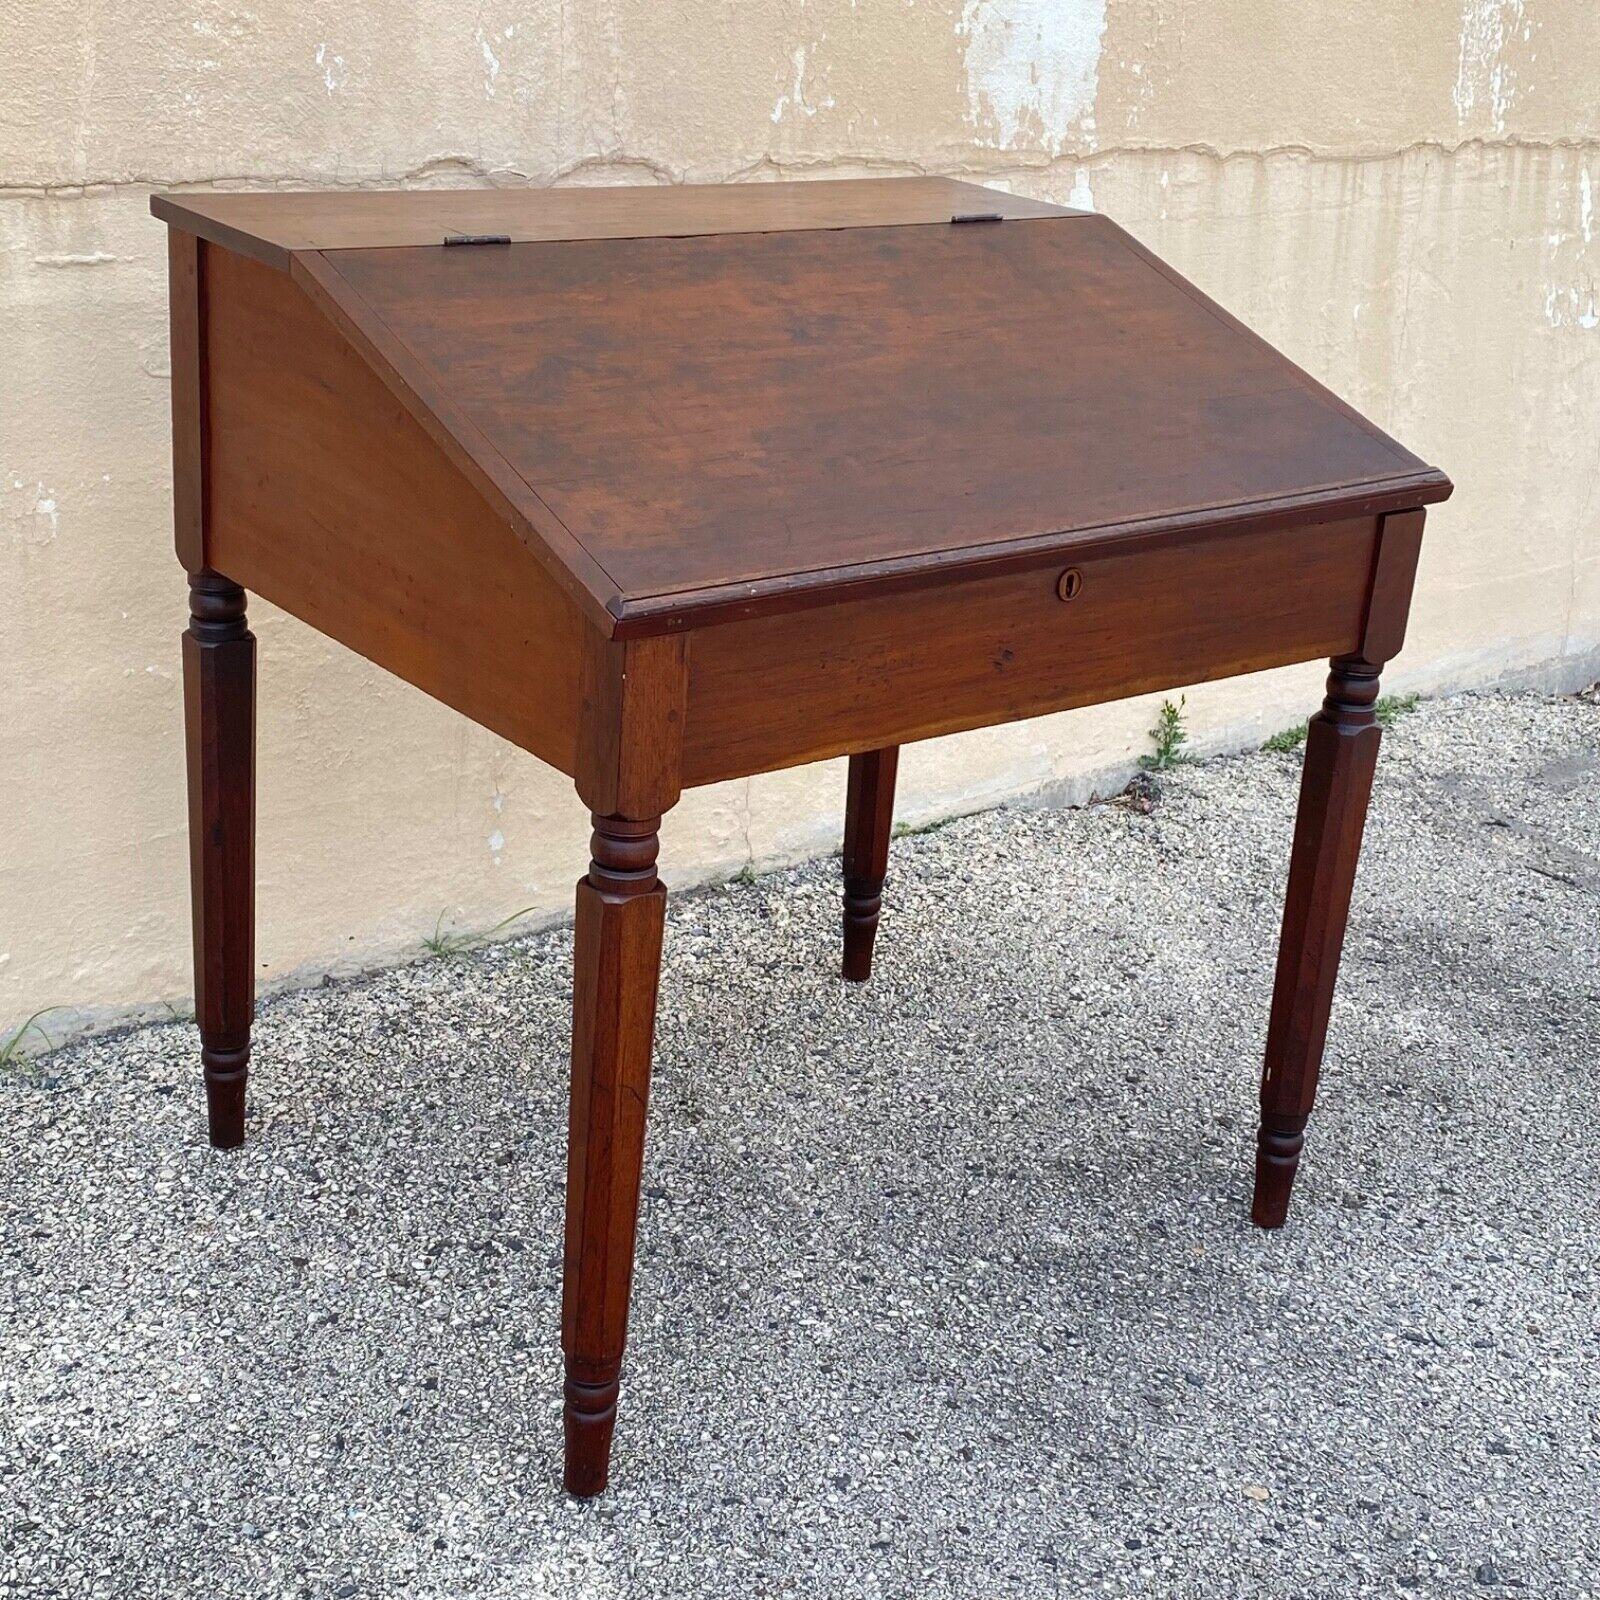 Antique Primitive Colonial Cherry Walnut Tall Schoolmasters Desk Stand Table. Item featured has a lift top, slanted surface, tall legs, solid wood construction, distressed finish, no key, but unlocked, very nice antique item, quality American